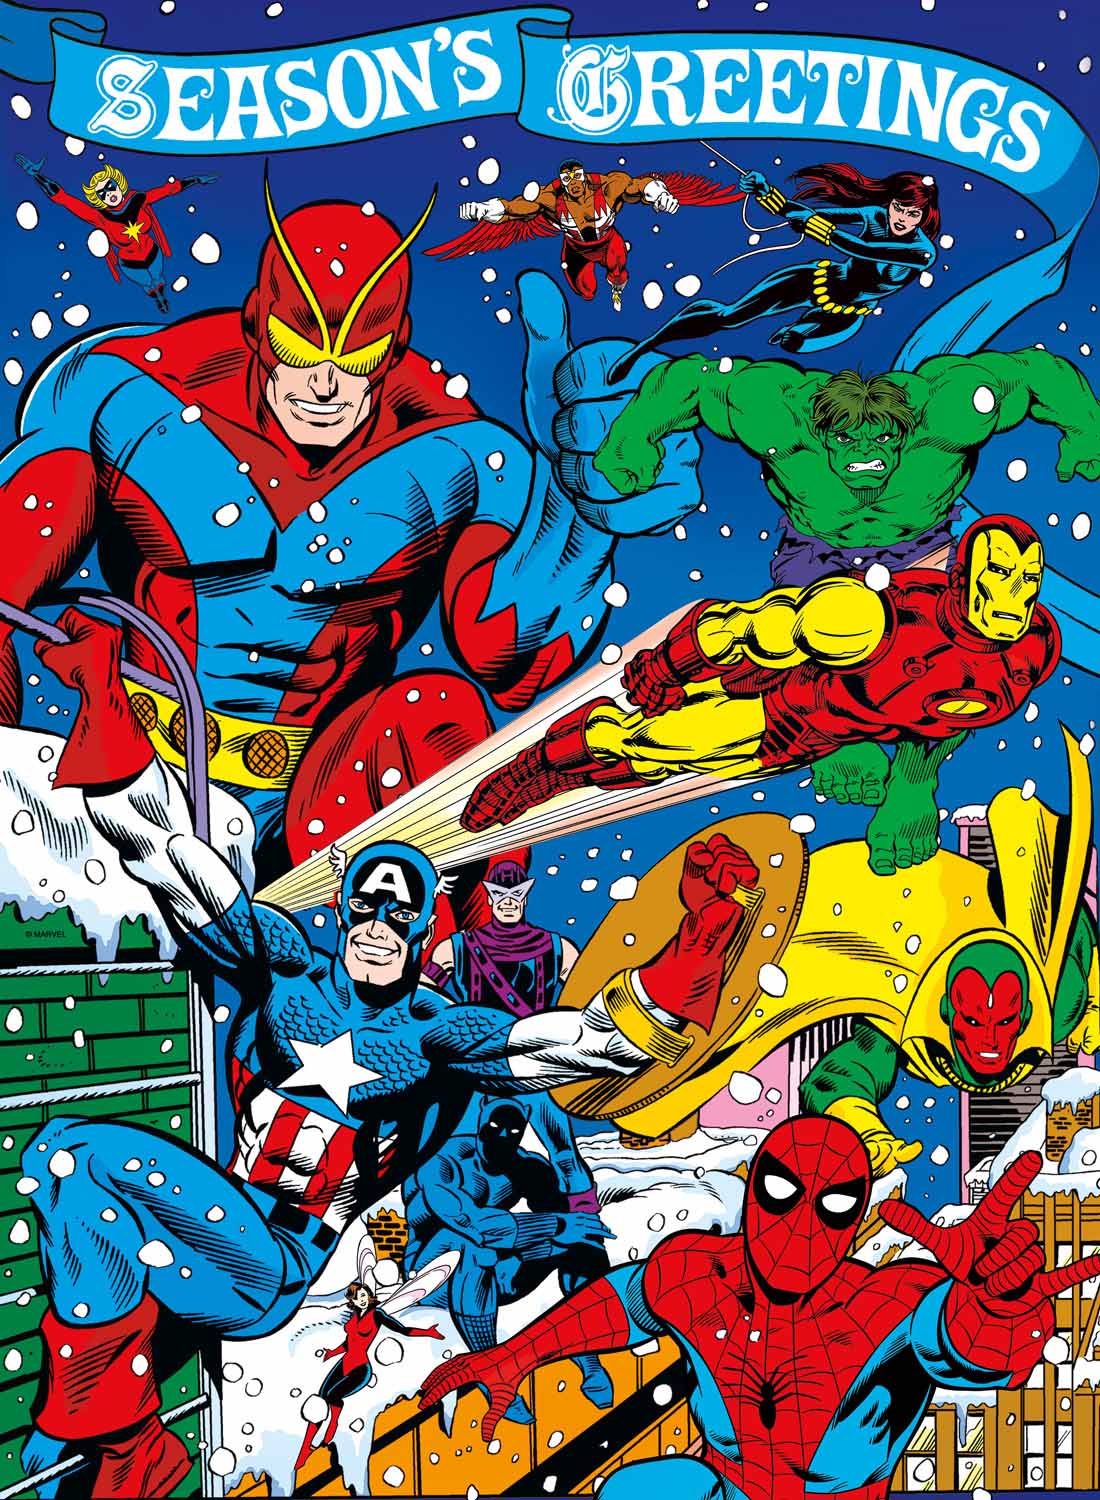 Season's Greetings From Marvel, 100 Pieces, Buffalo Games